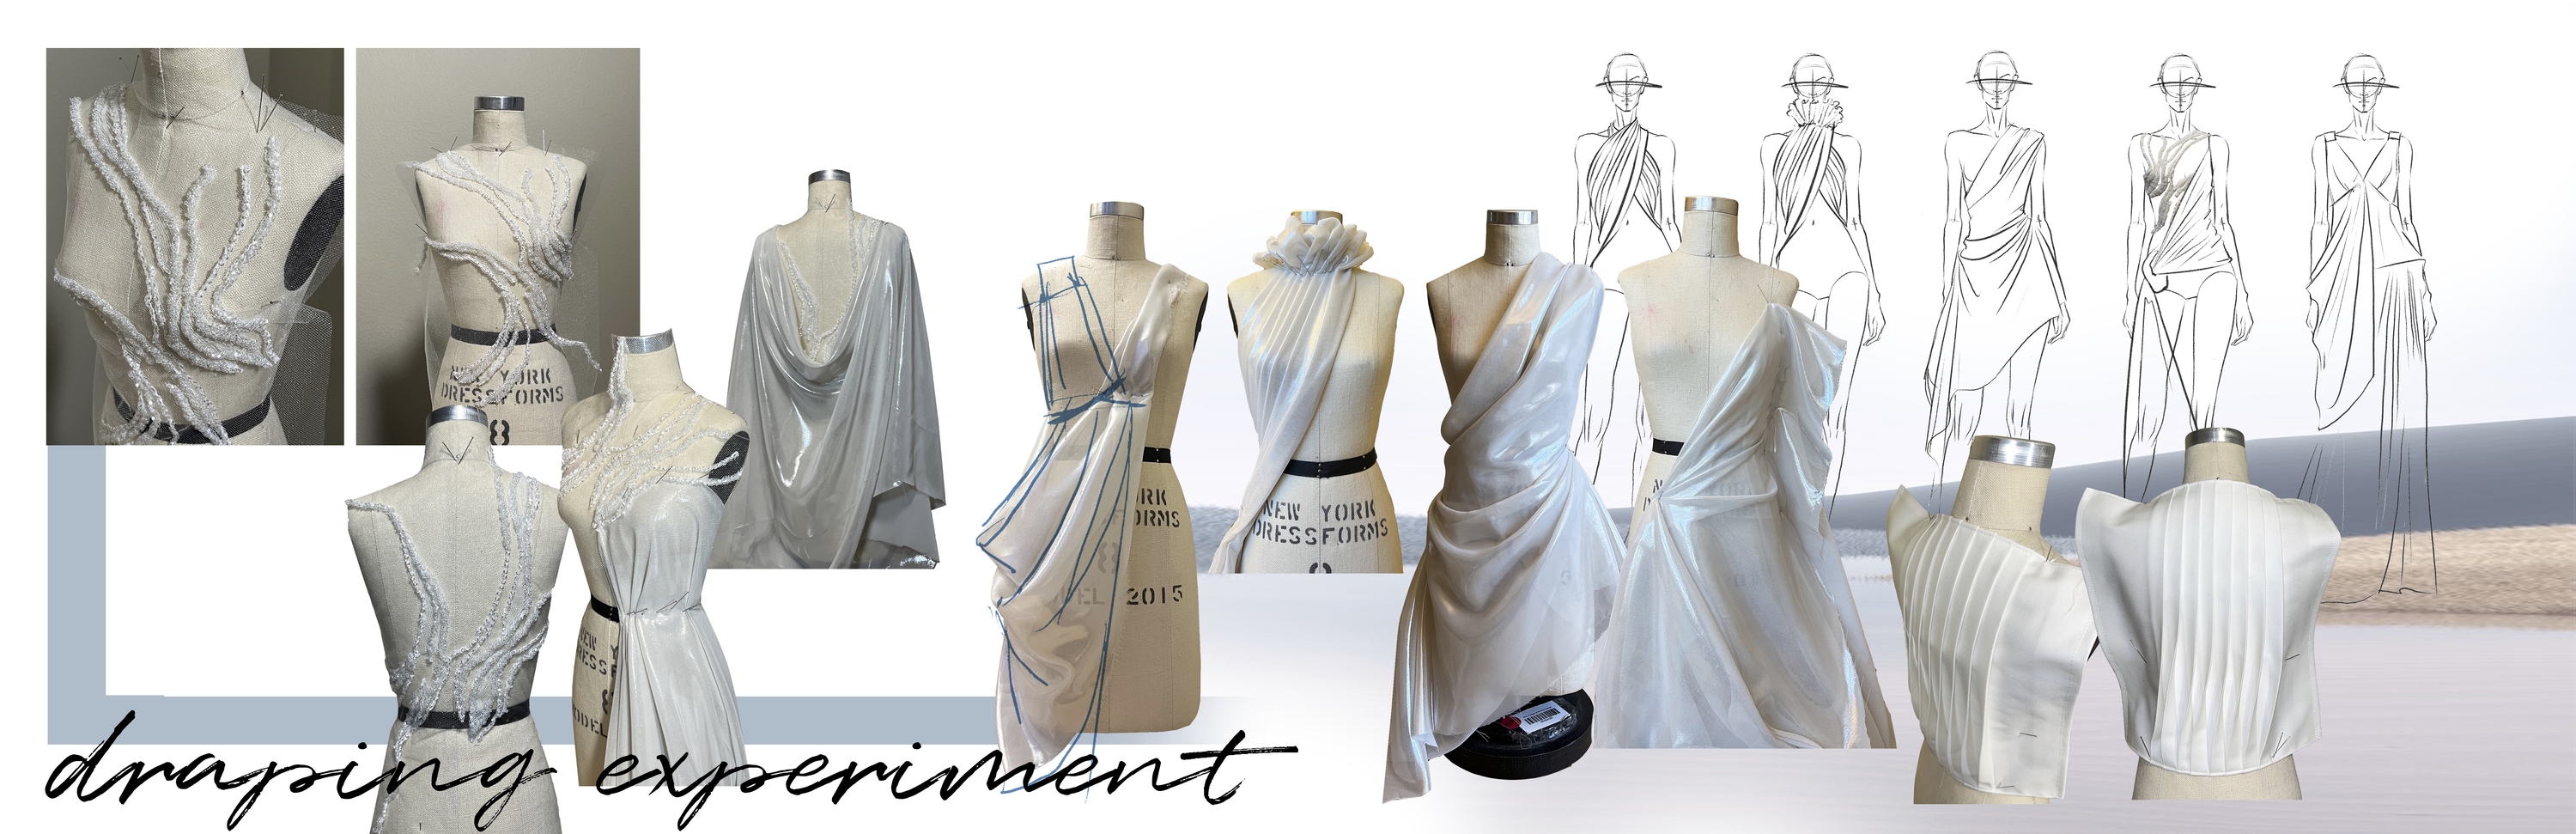 draping experienment